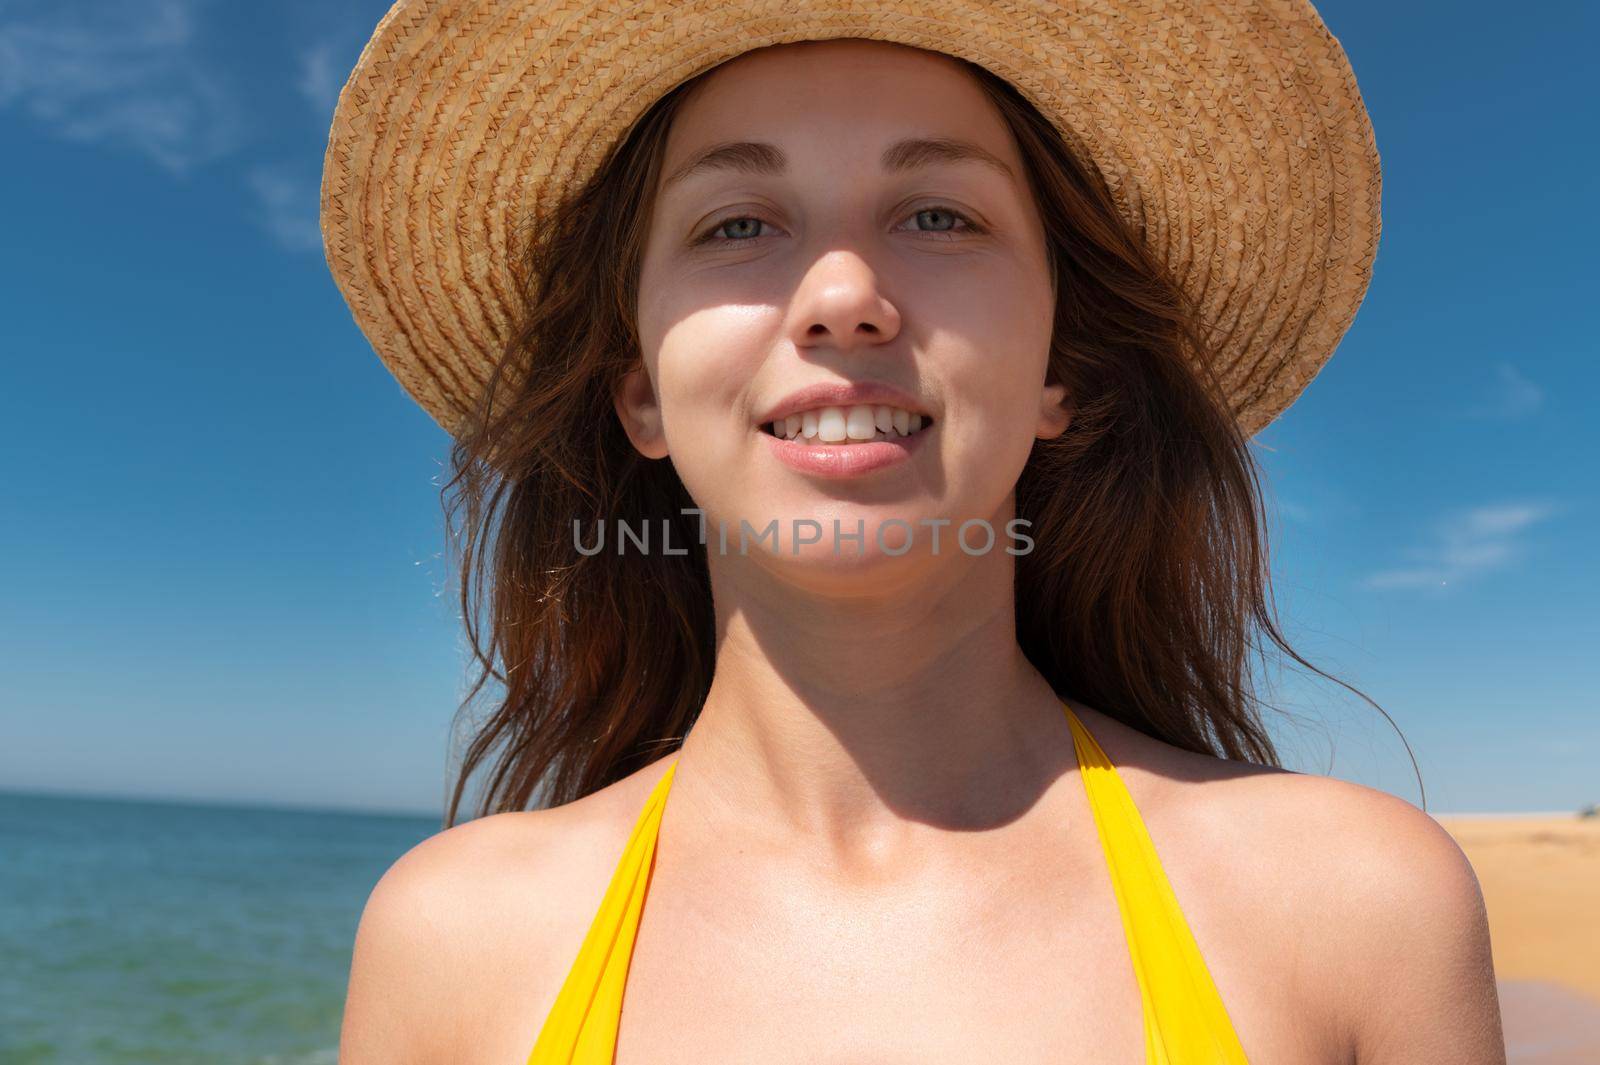 Close-up portrait of attractive caucasian young woman in straw hat and yellow swimsuit smiling against blue sky and sea on a sunny day.